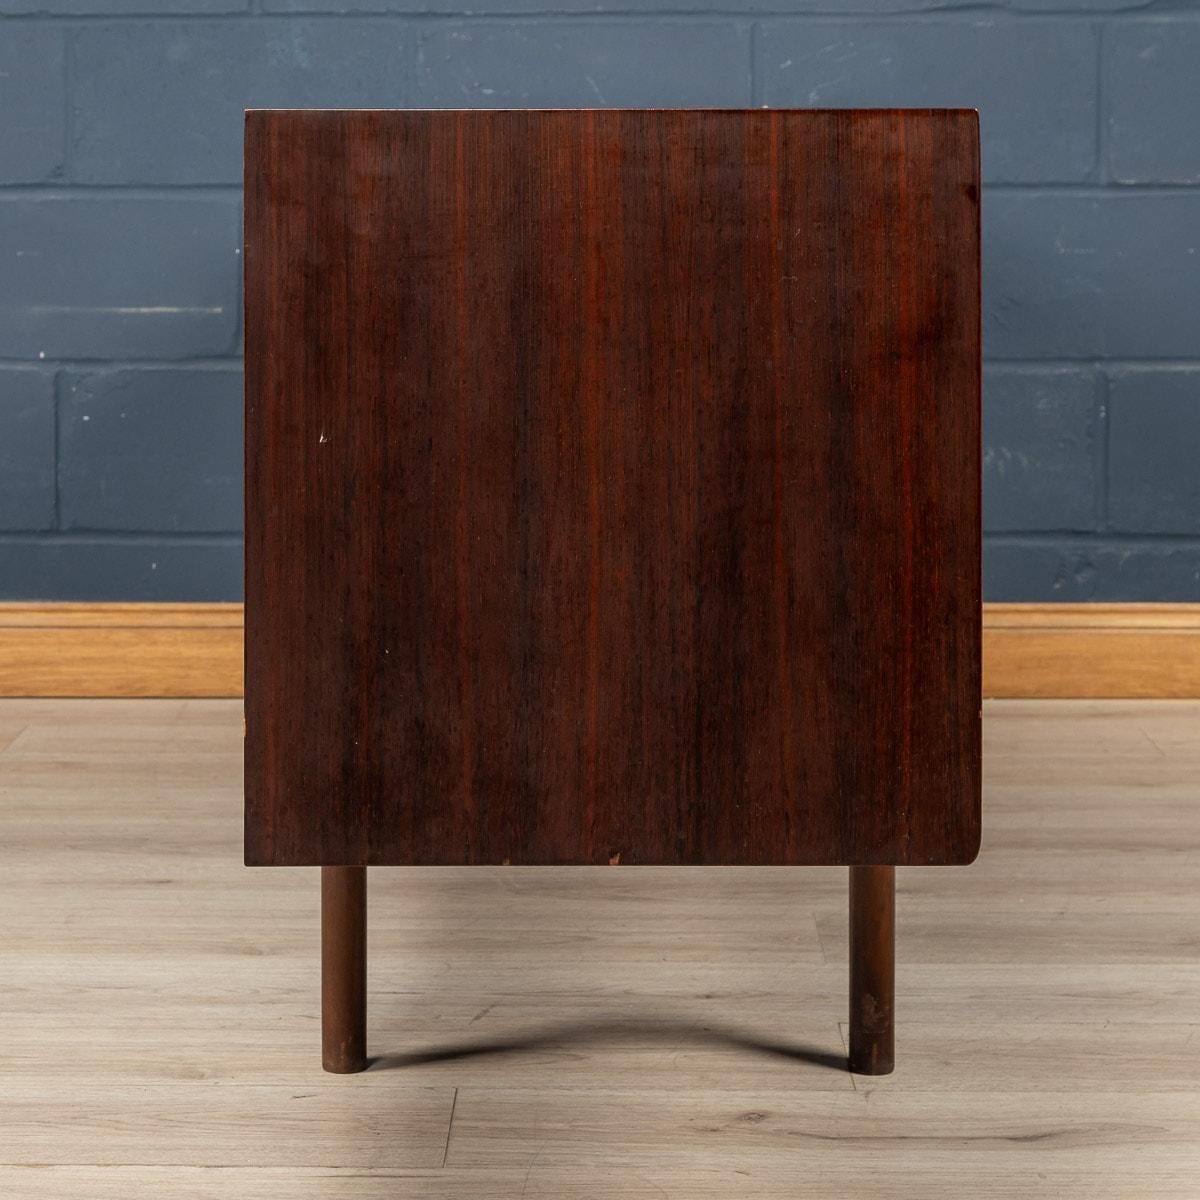 Scottish 20th Century Rosewood Sideboard Designed By Tom Robertson For A H Mcintosh